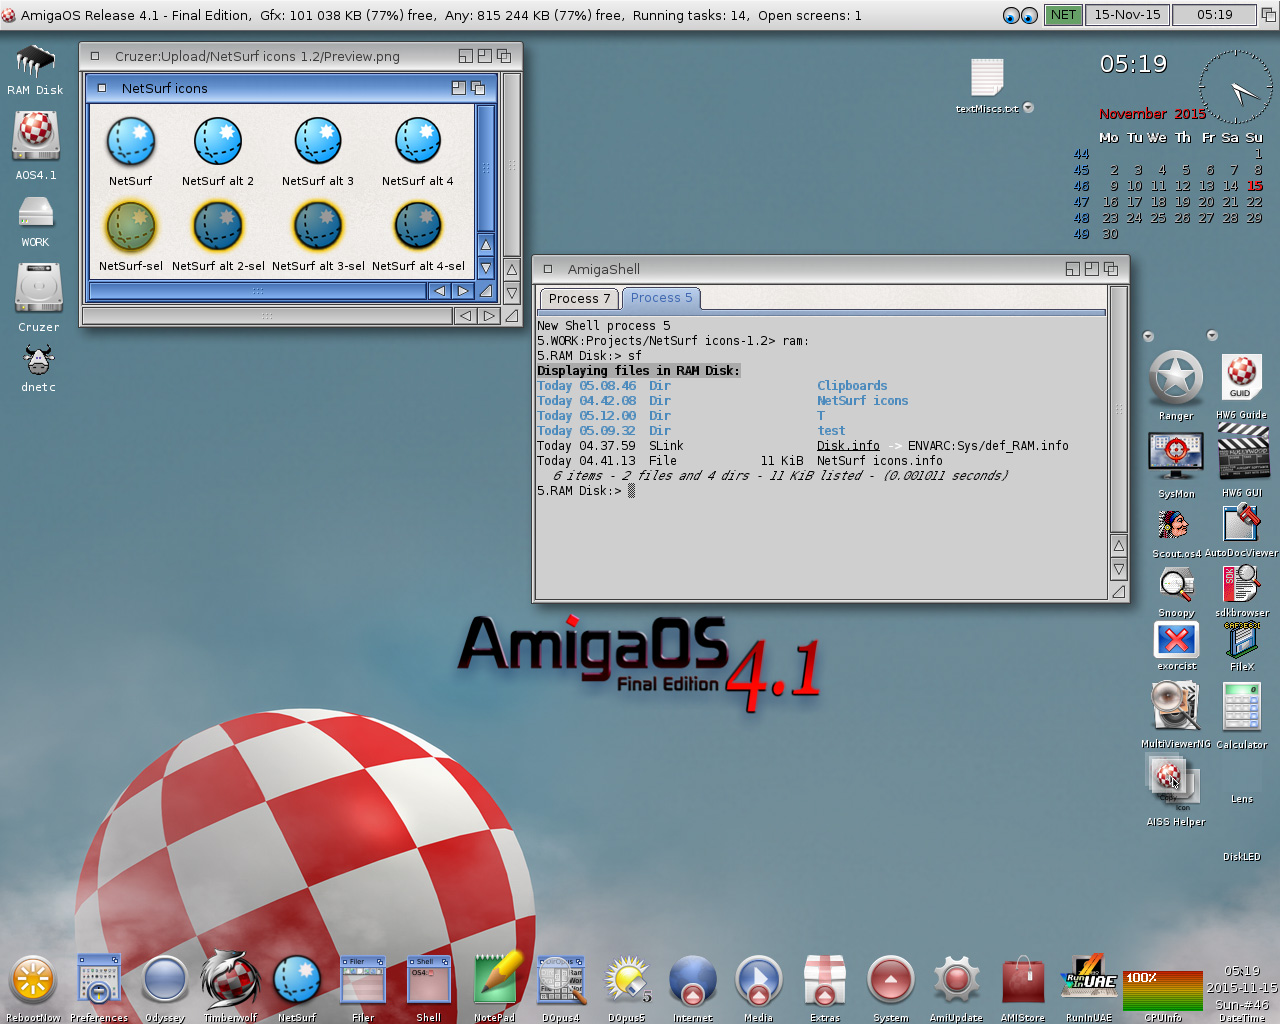 AmigaOS 4.1 FE-NetSurf icons and sf (ShowFiles) in tabbed Shell